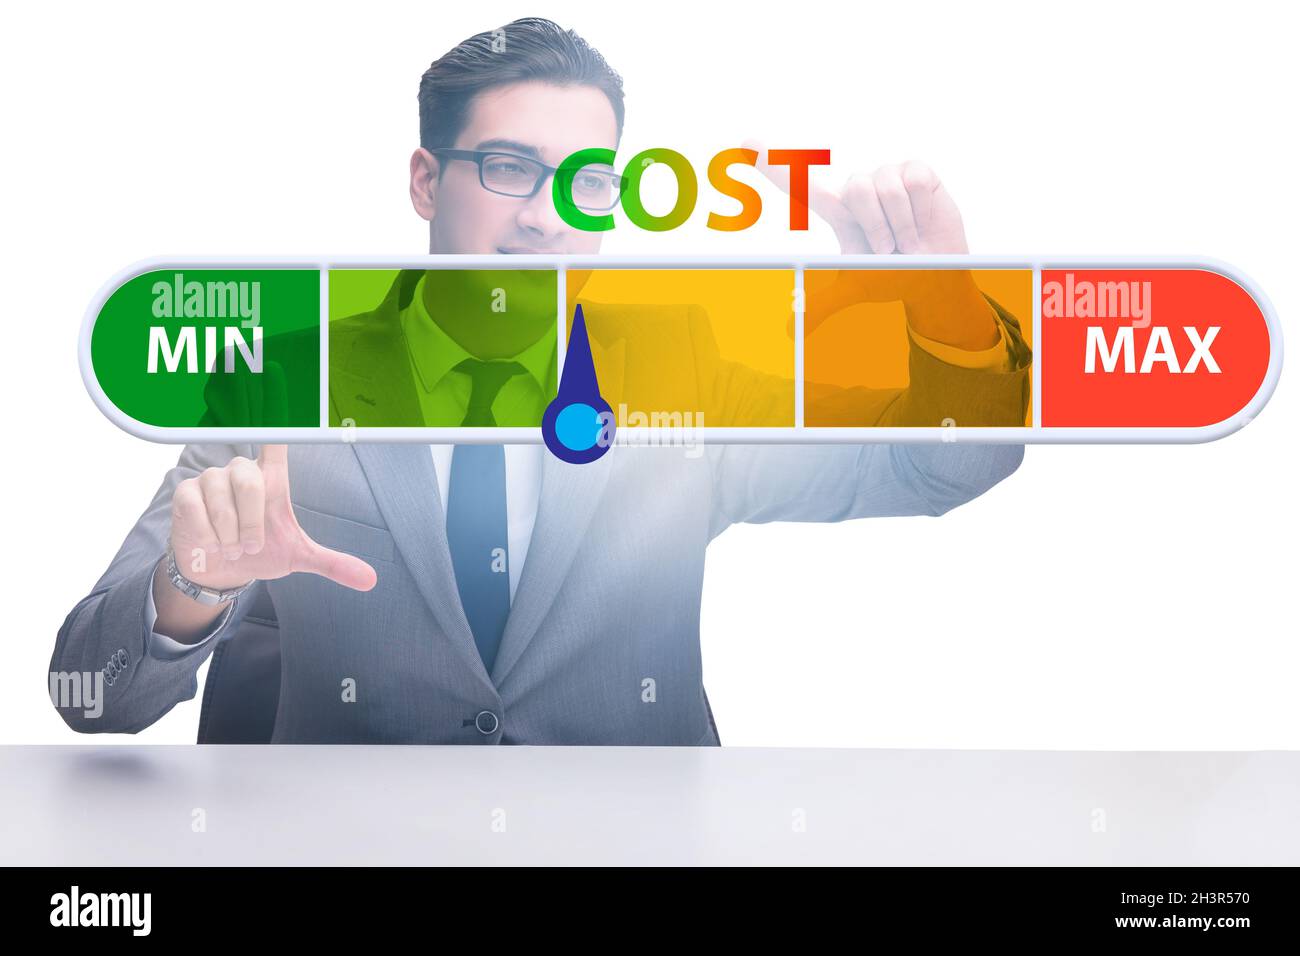 Businessman in cost management concept Stock Photo